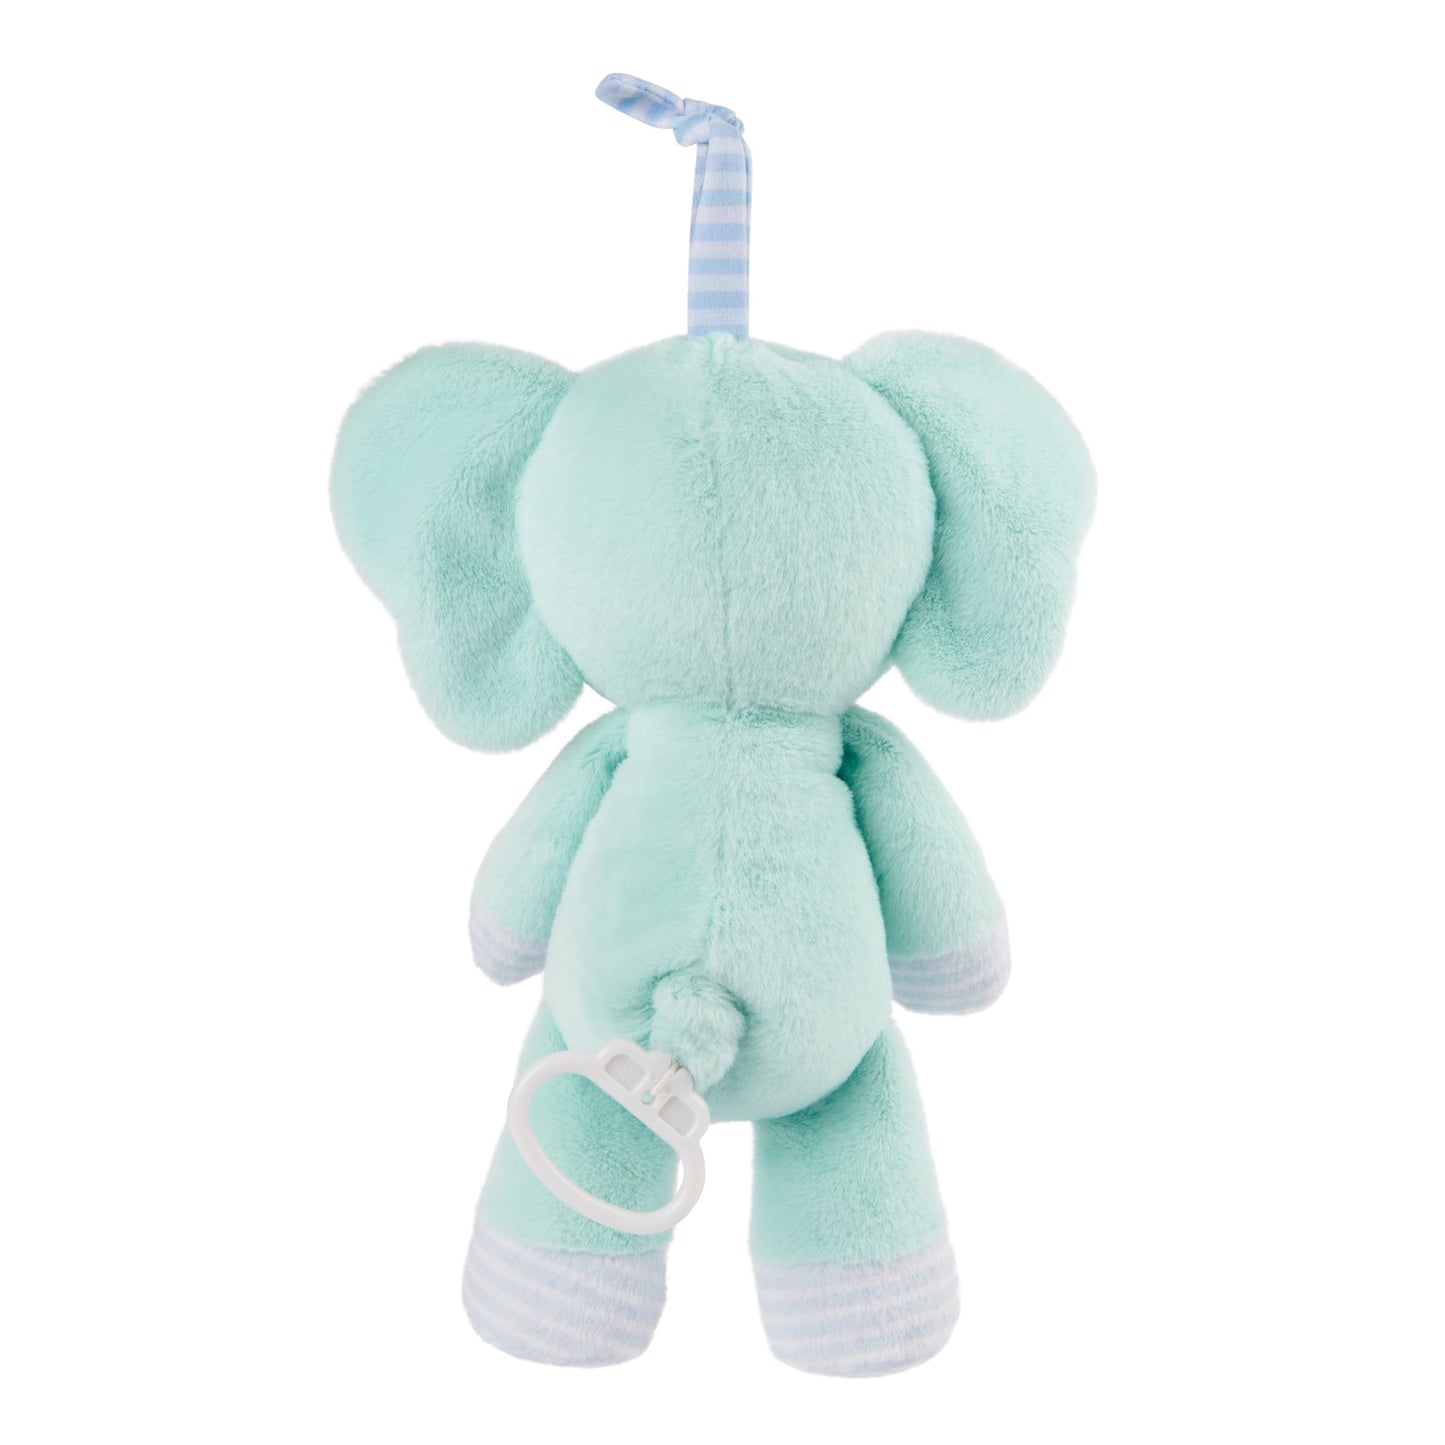 SAFARI FRIENDS ELEPHANT PULL-DOWN MUSICAL PLUSH (PLAYS BRAHMS’ LULLABY), 12 IN